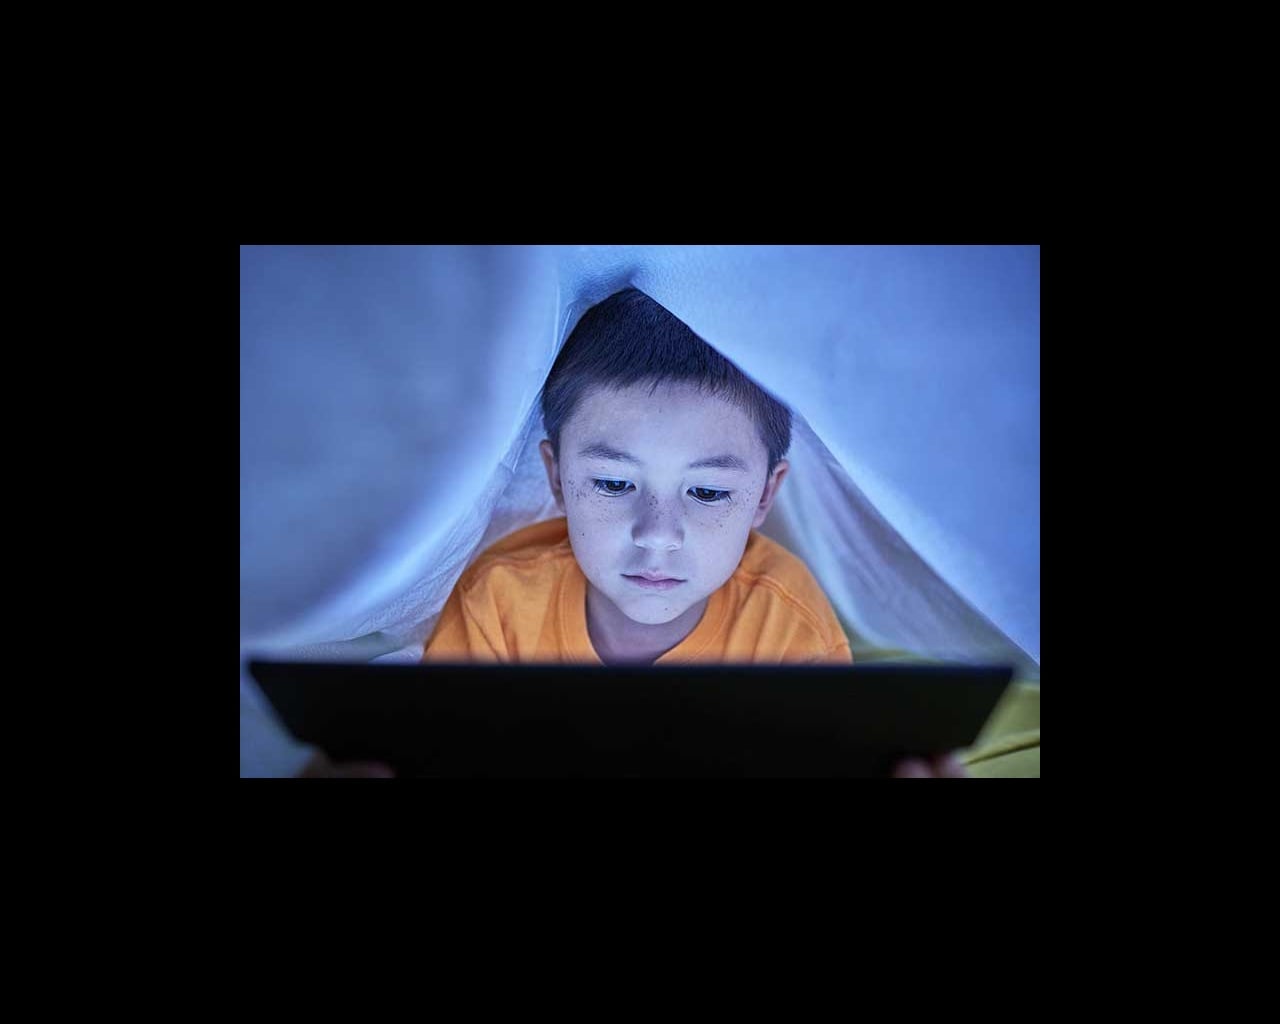 Young boy looking online under the covers